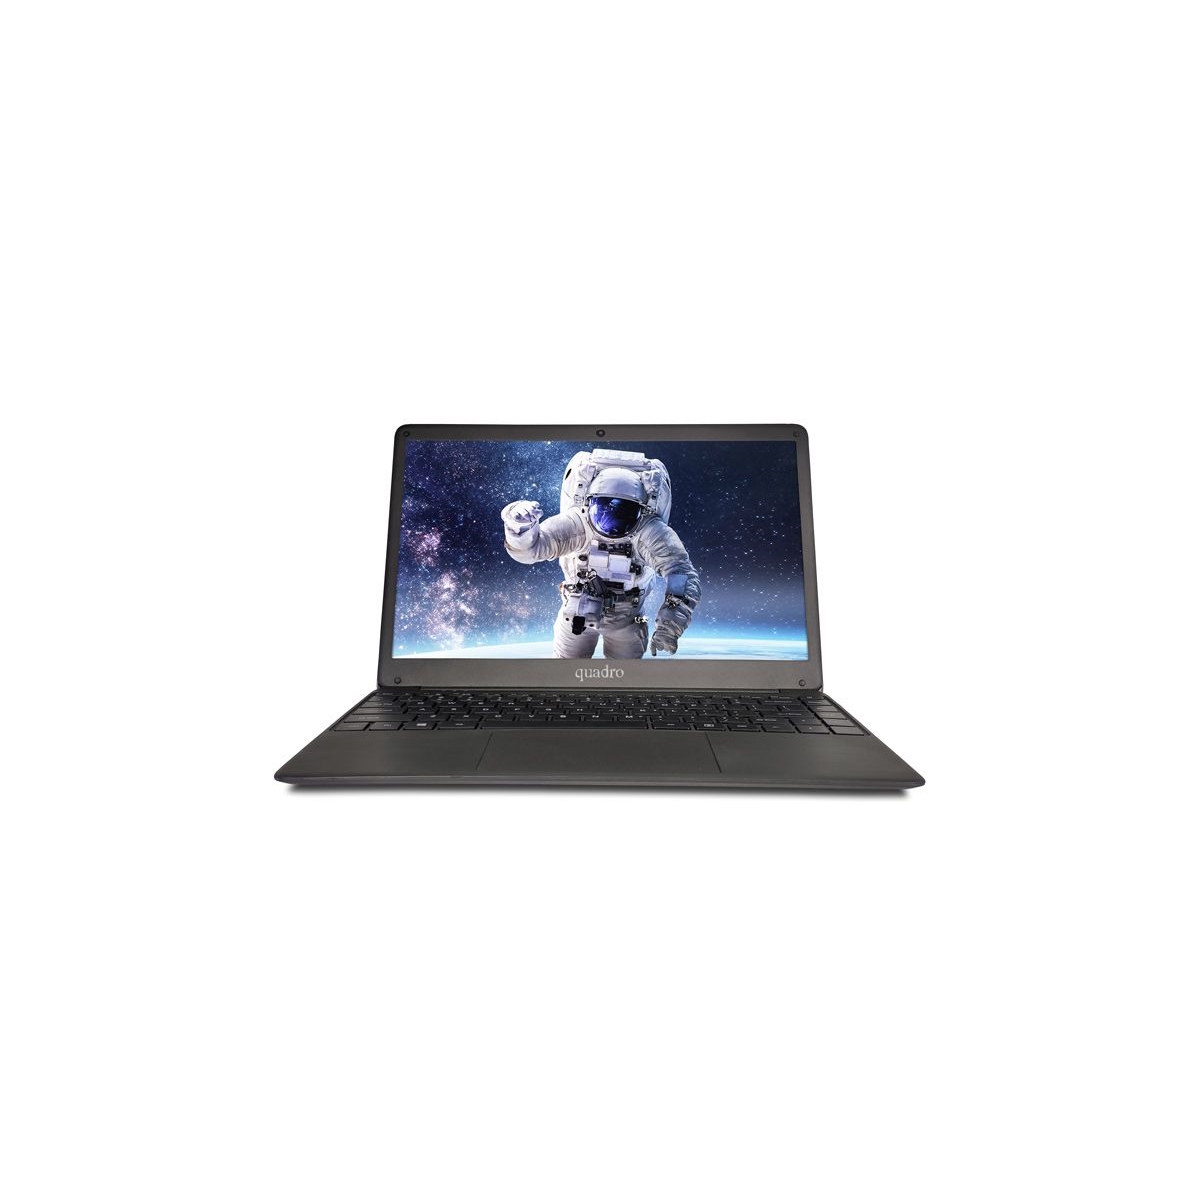 QUADRO NOVABOOK GN15-140P-CJ N4020 4GB 128GB SSD O/B 14" HD LED WIN11 HOME NOTEBOOK